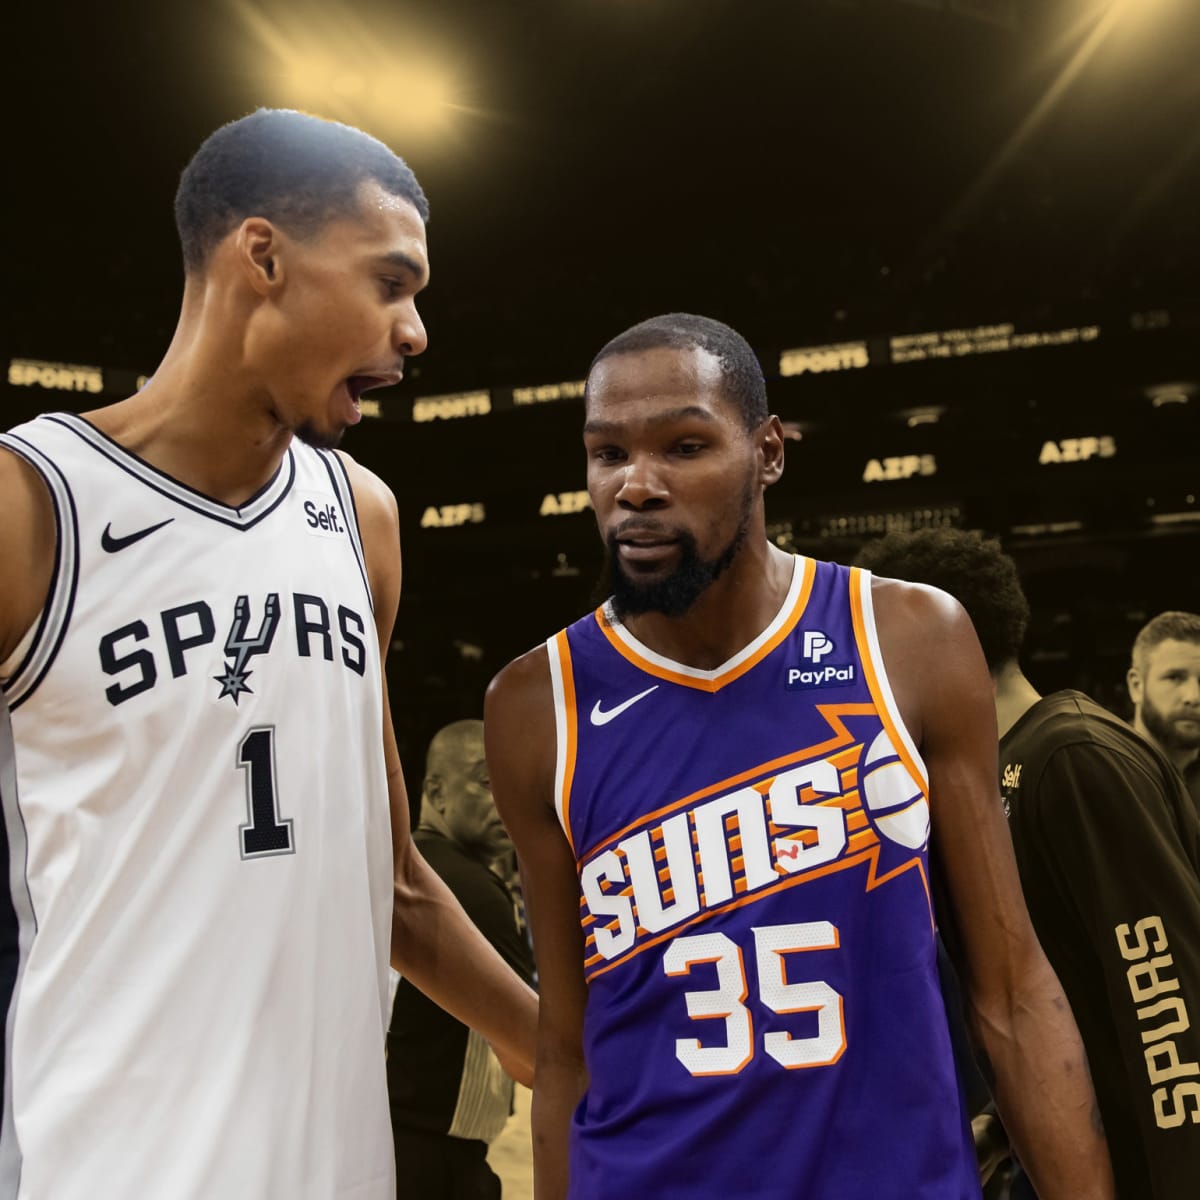 NBA Buzz - Kevin Durant is now a verb, according to Urban